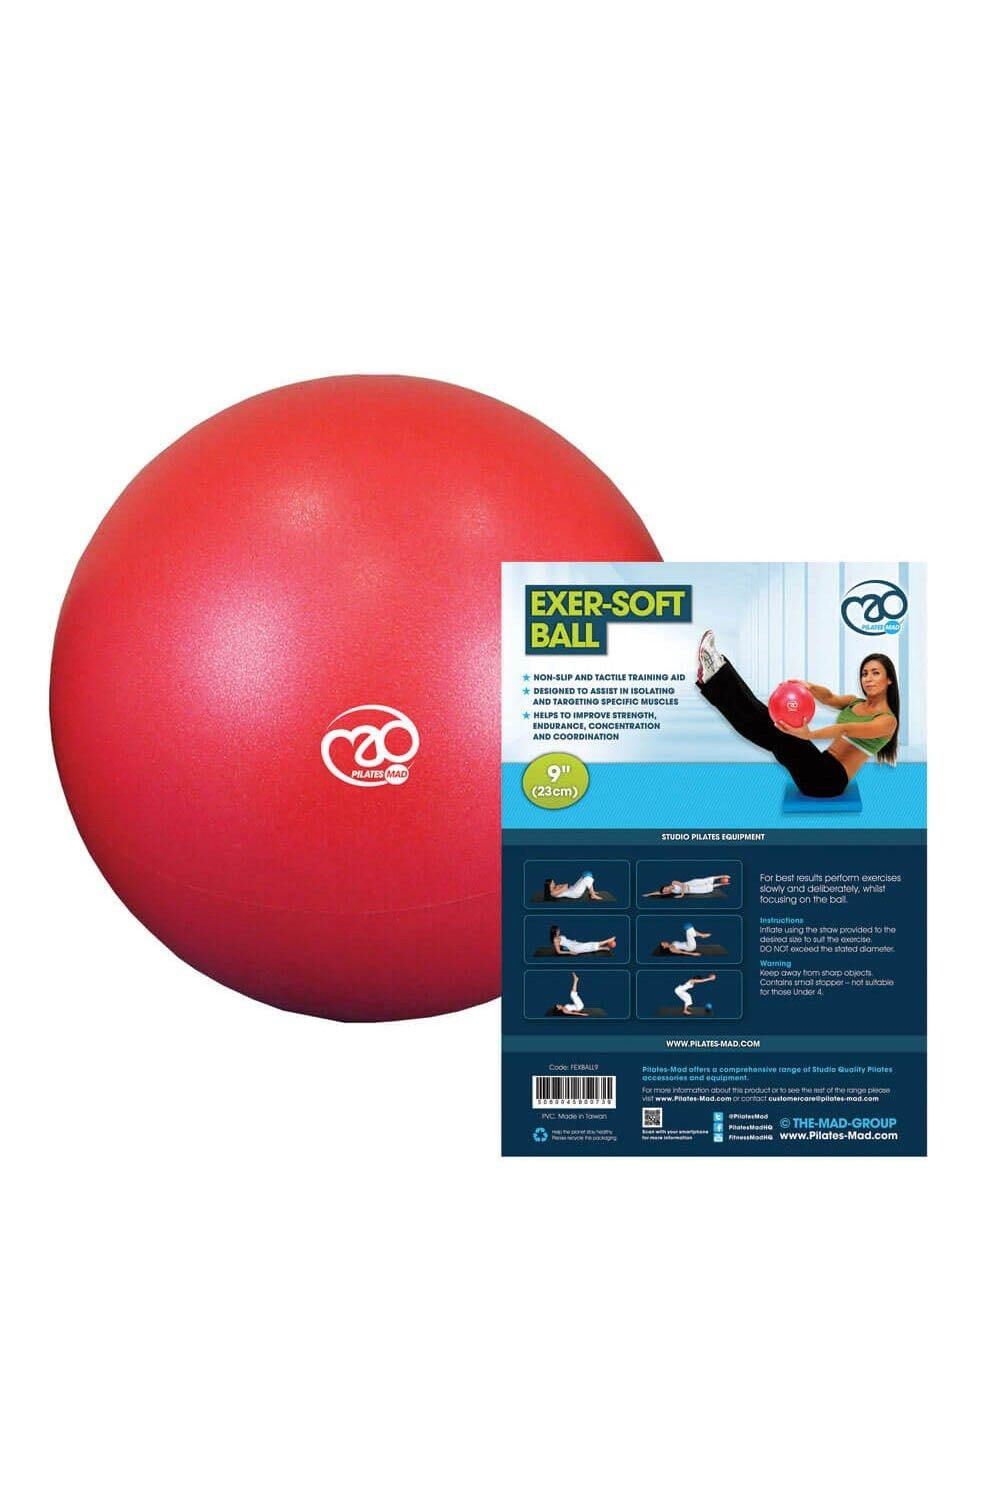 Fitness Mad 9 Inch Exer-Soft Ball